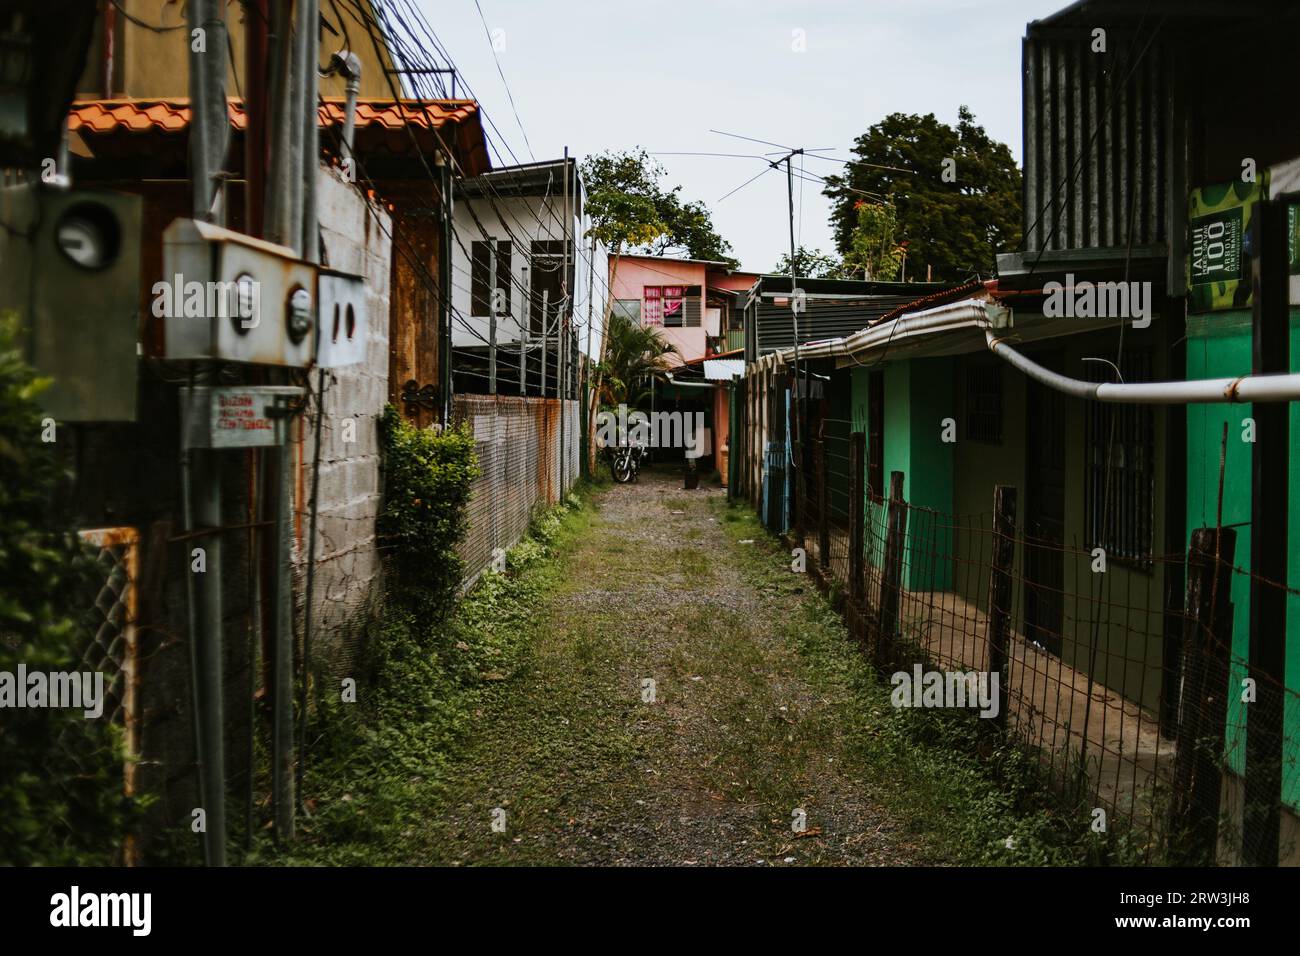 A colorful but slightly overgrown alleyway on the outskirts of Jaco, Costa Rica. Stock Photo